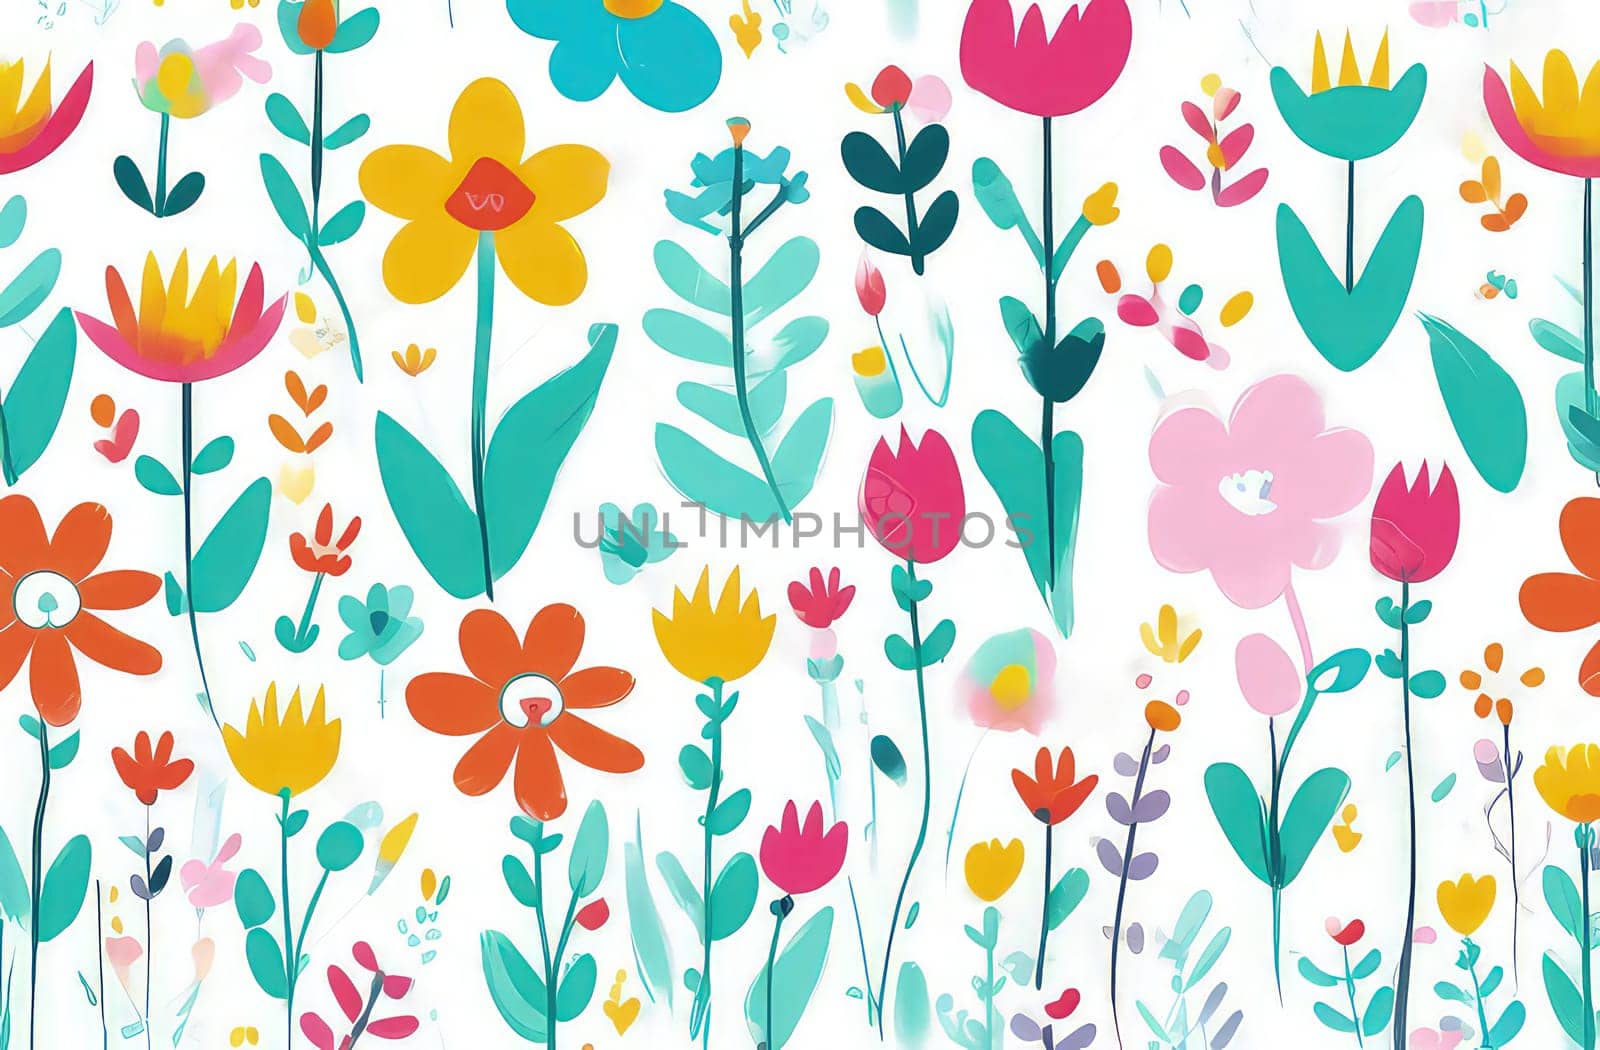 Beautiful celebration spring flowers on white background. Concept Birthday, Mothers Day, Womens Day, March 8. Spring easter flower background. Spring, easter greeting card design layout. Copy space